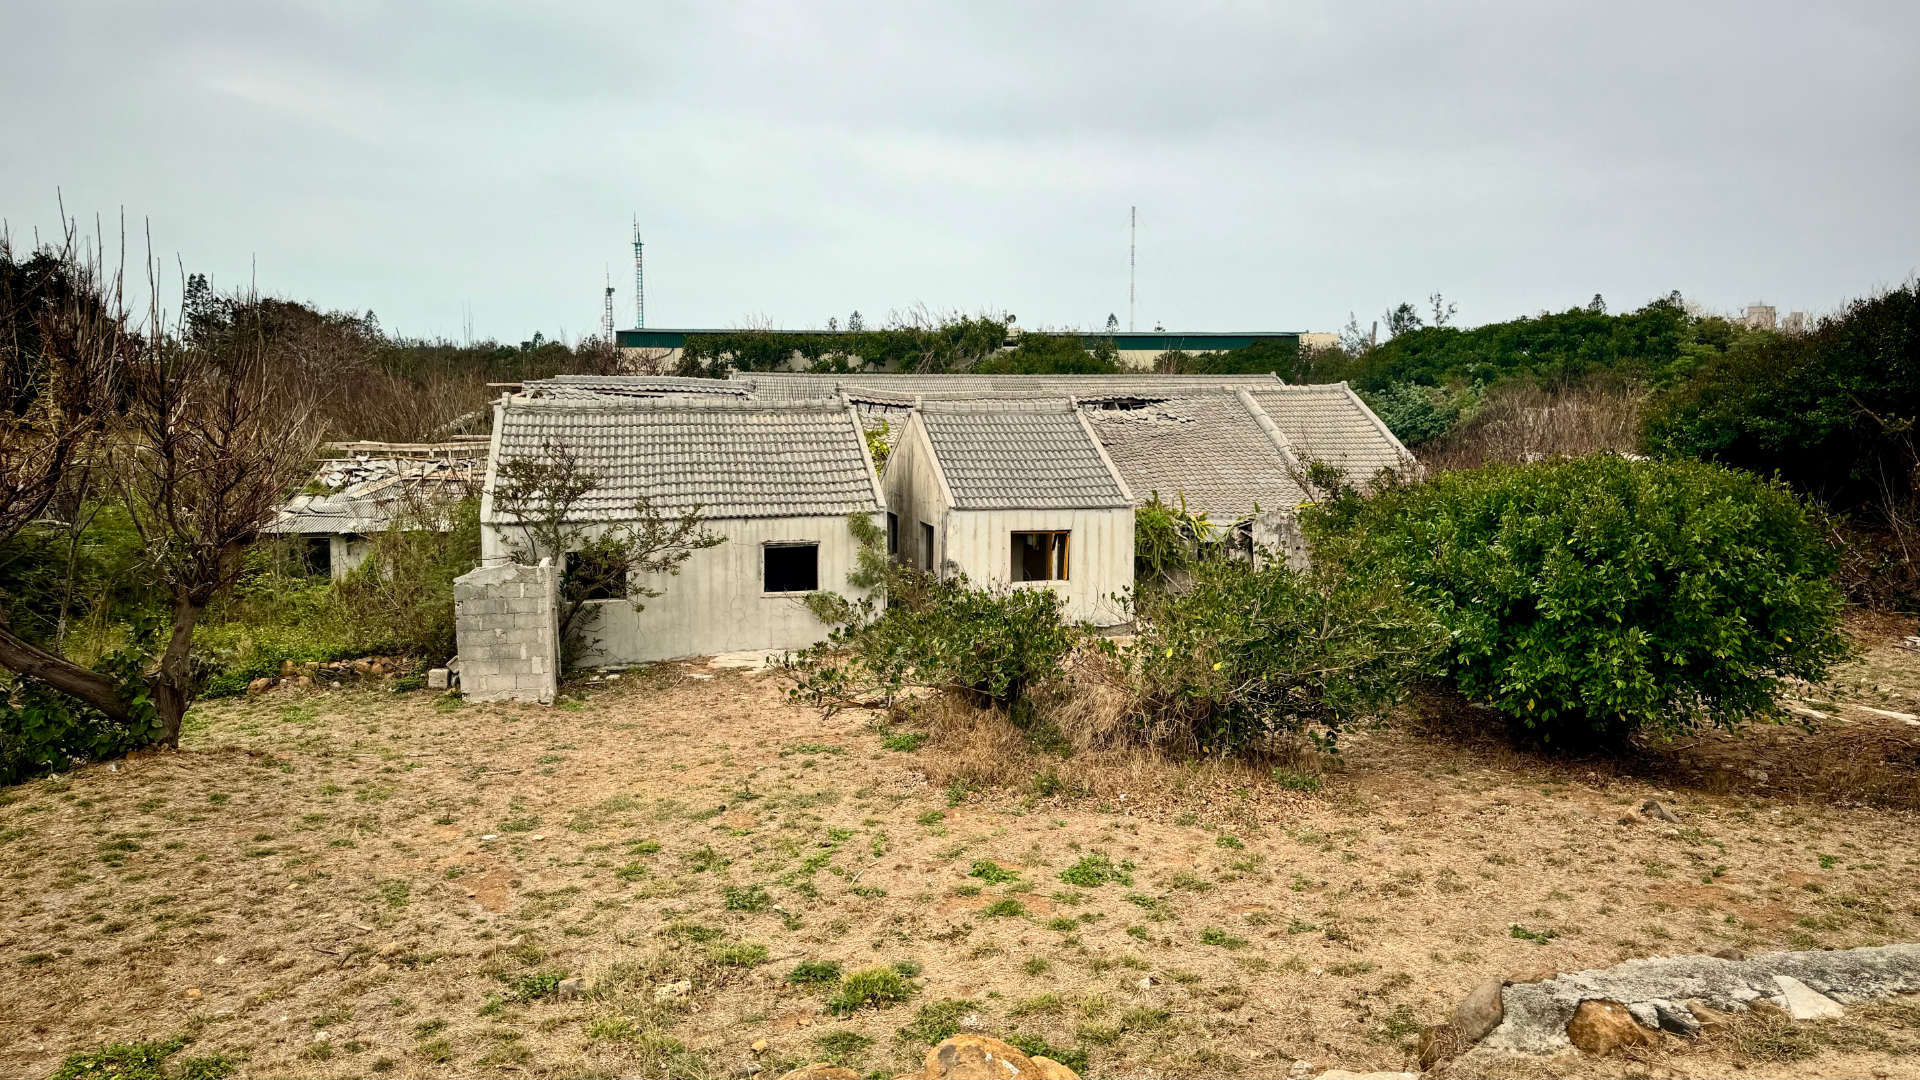 An abandoned village of concrete houses.